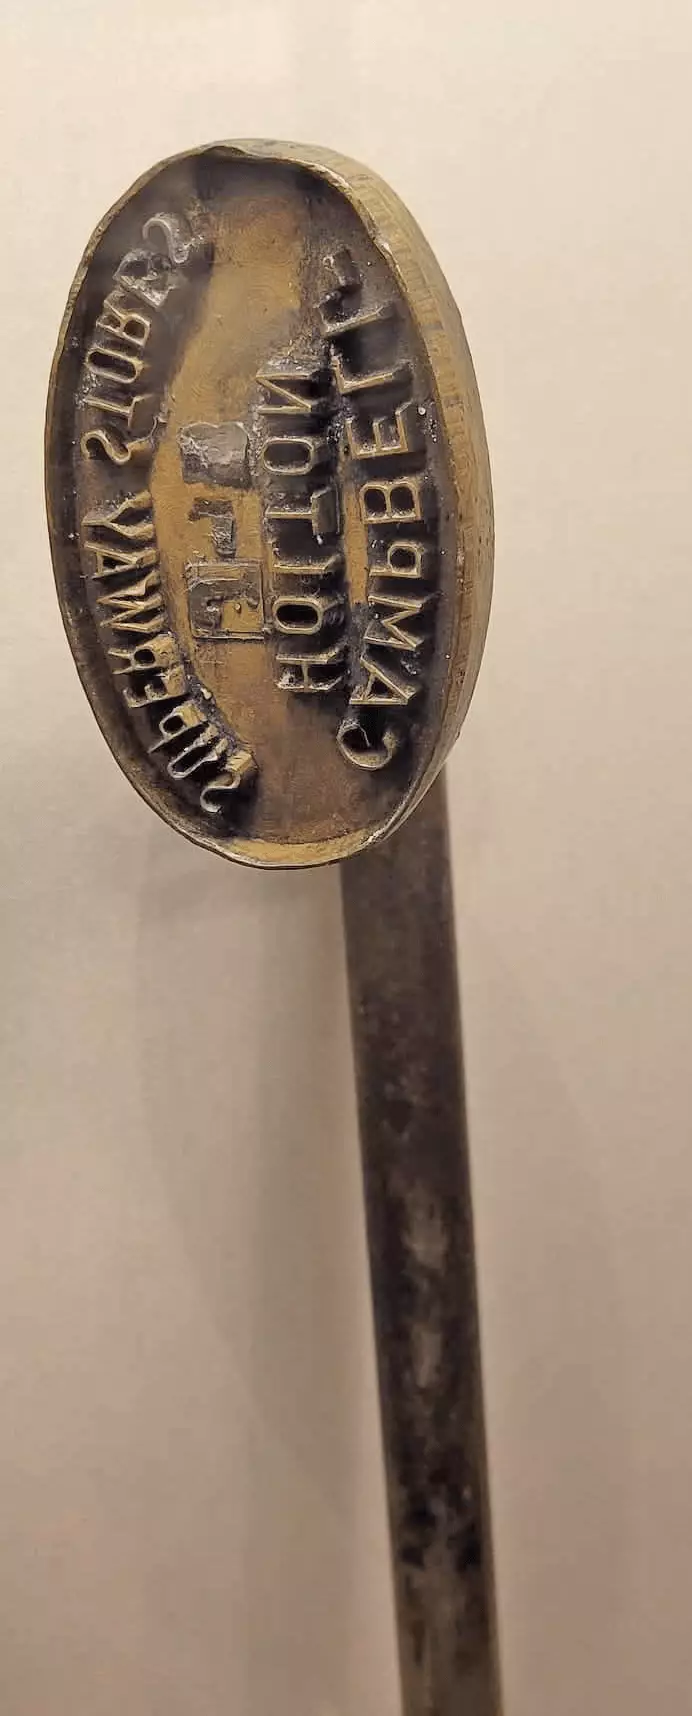 Metal stamp that has 'Campbell Holton Superway Stores' written backwards on it.